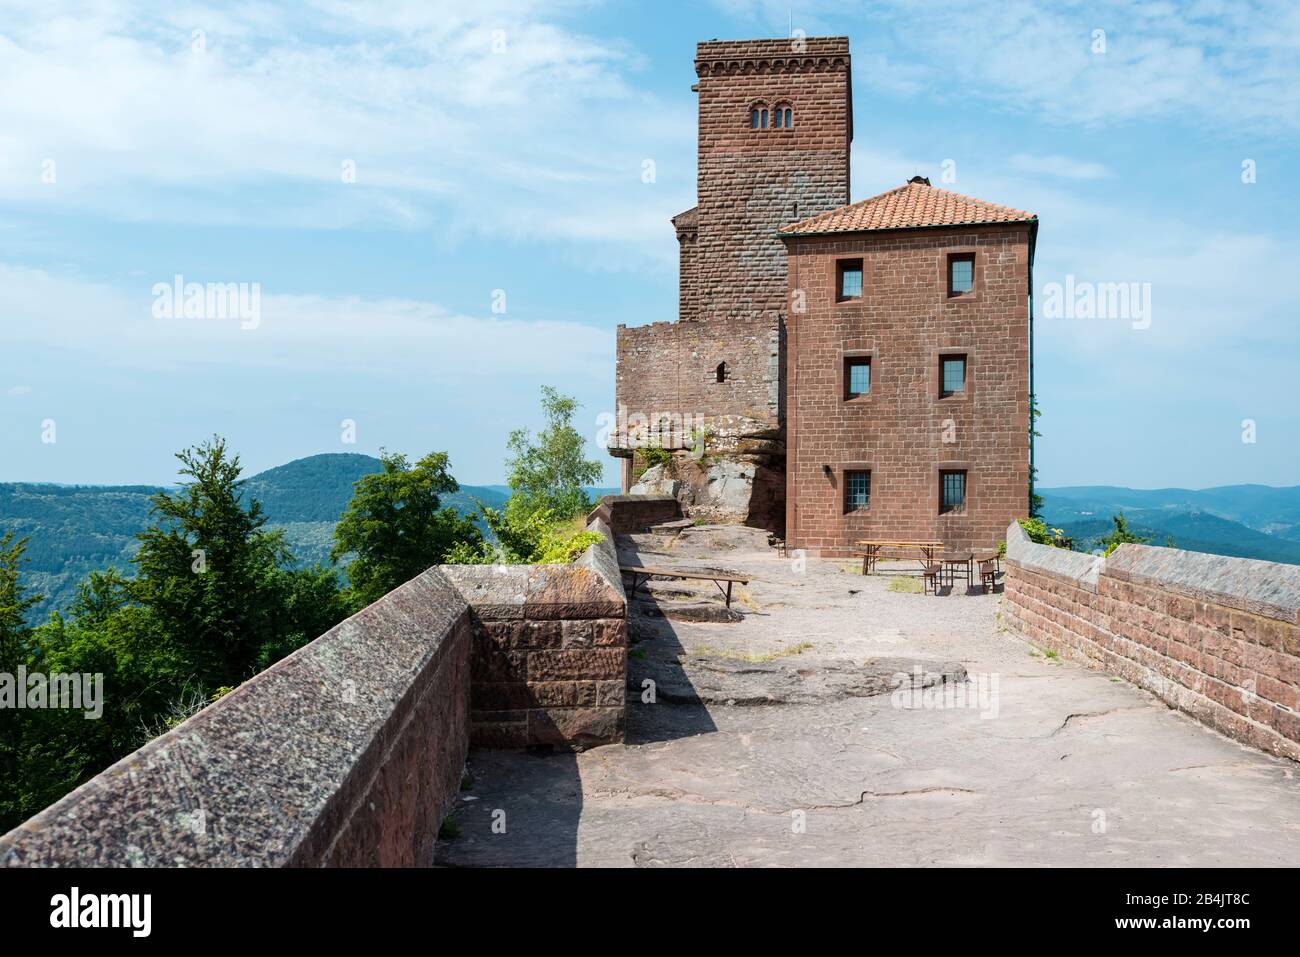 Castle Trifels near Annweiler, in the Wasgau in the Palatinate, imperial insignia and imperial jewels were kept there, Richard the Lionheart was imprisoned there, built from Rotsandstein mountain castle, protected cultural property according to Hague Convention, Stock Photo